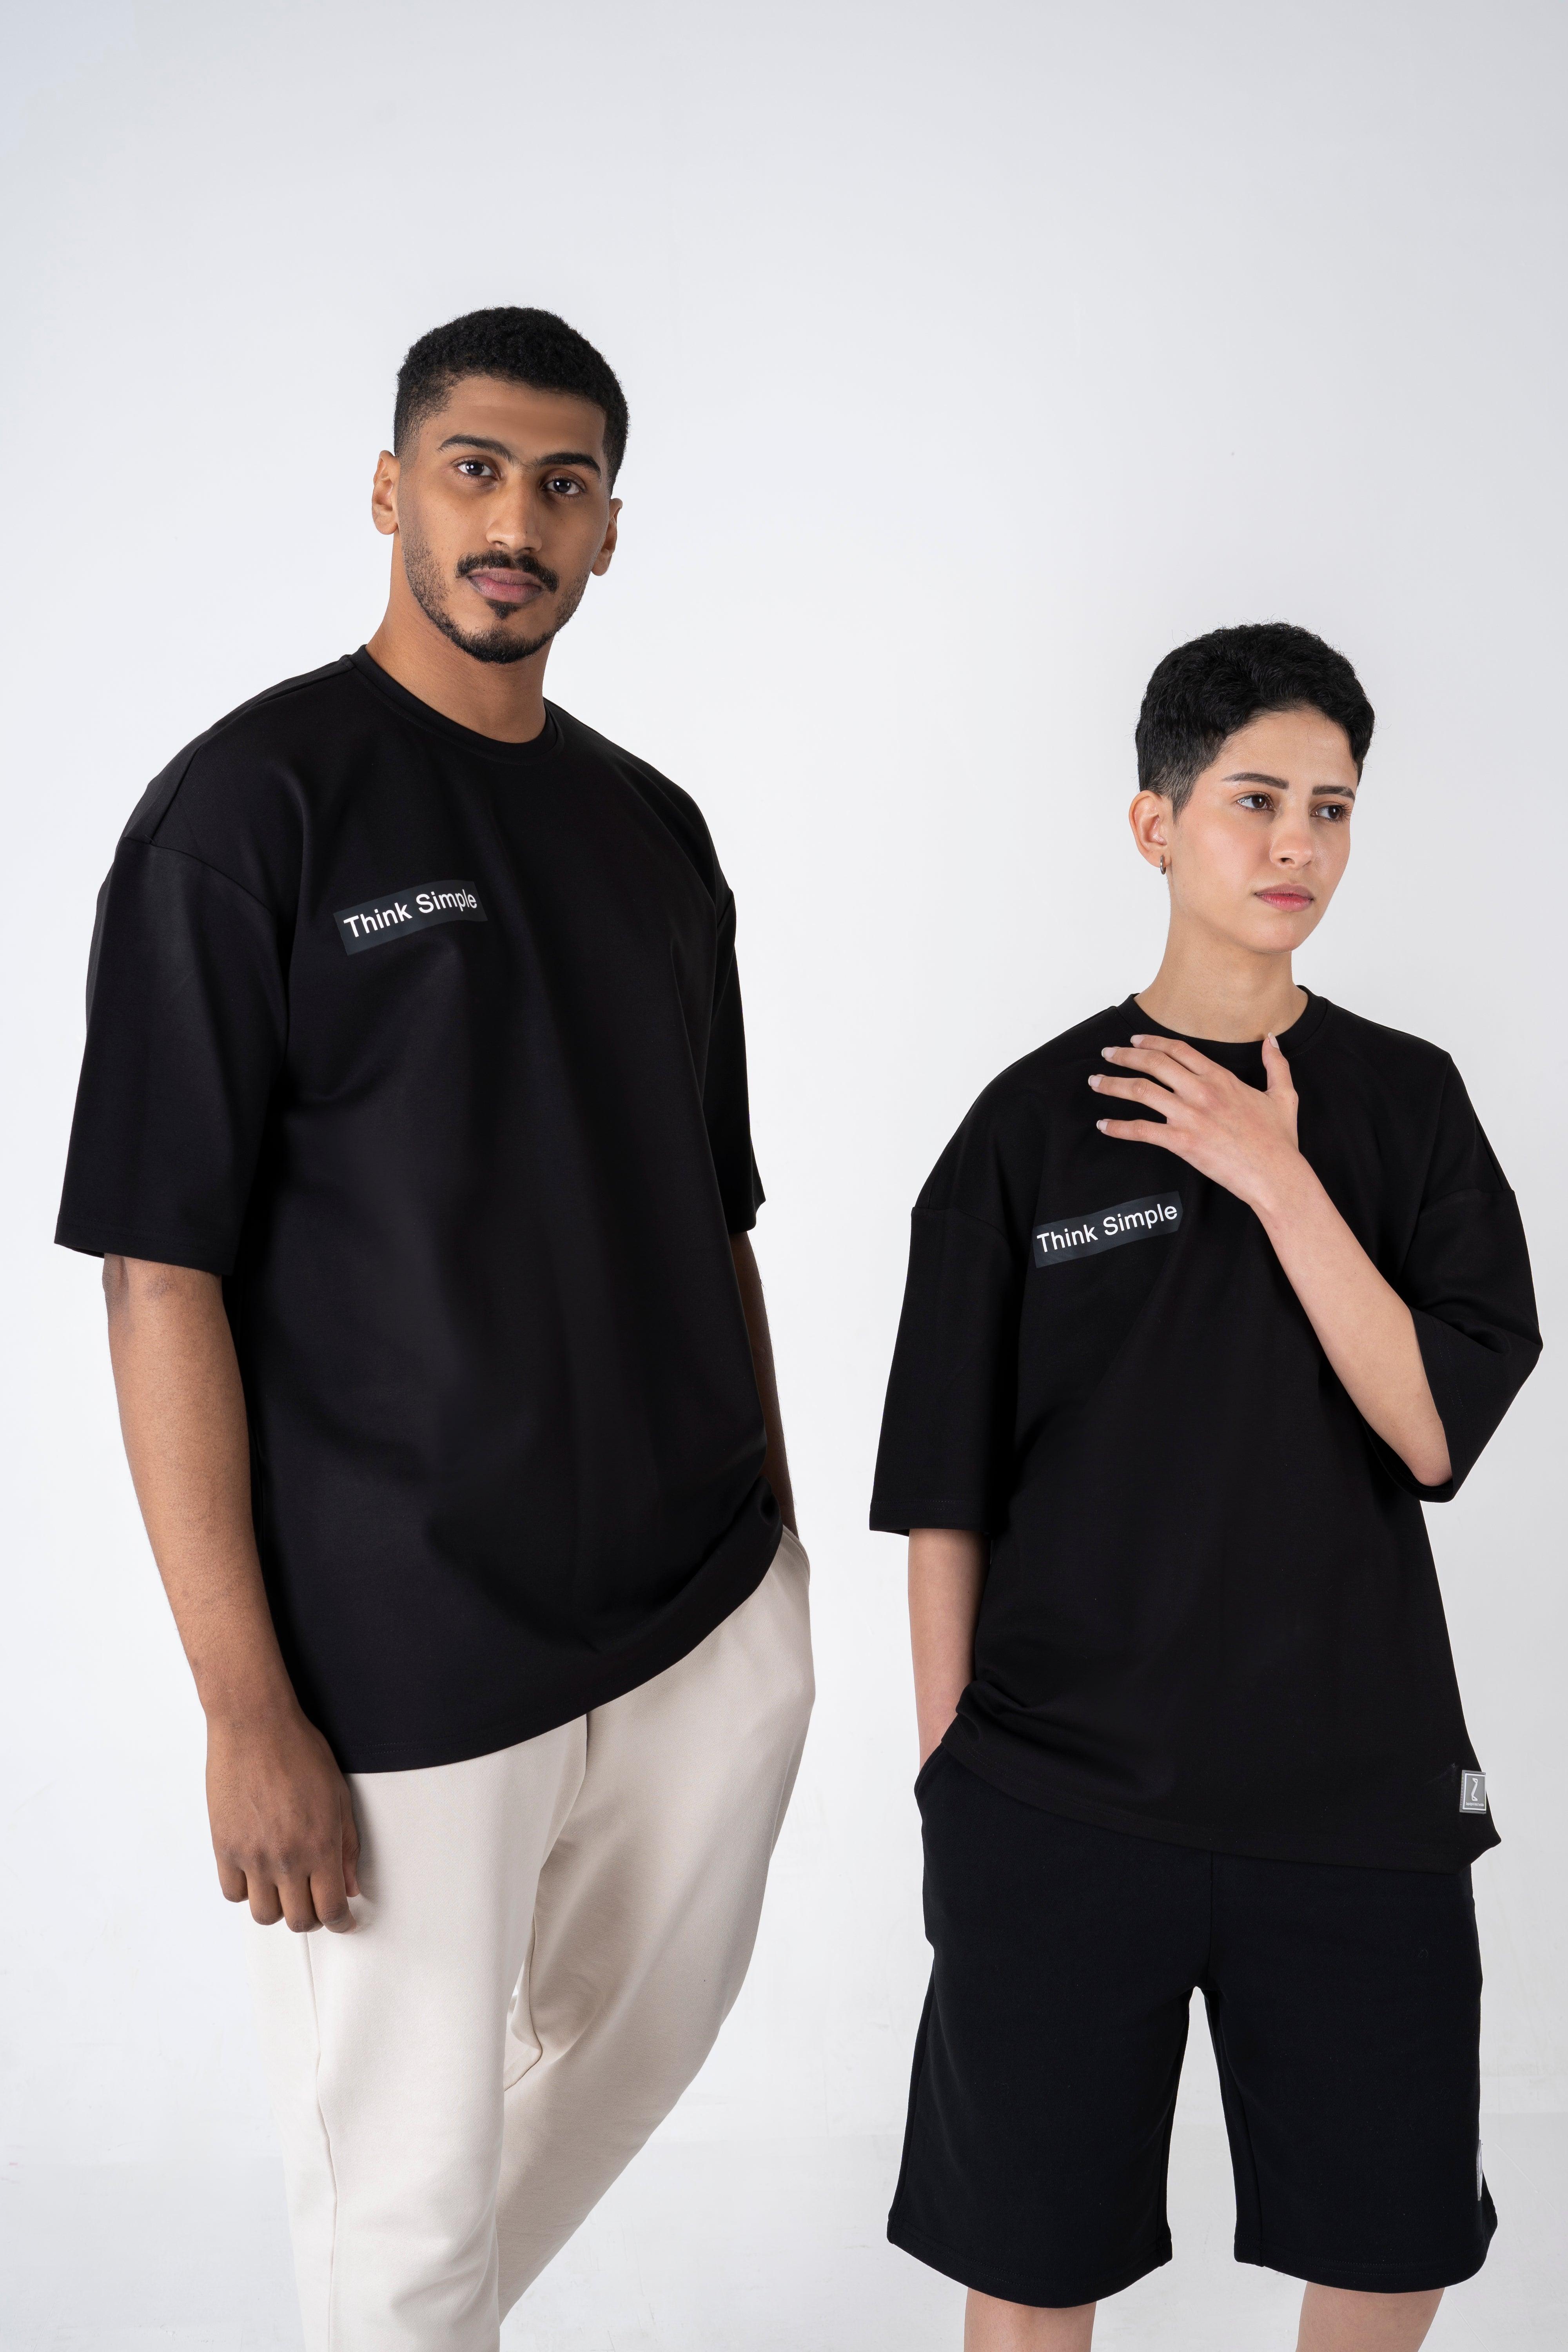 Black Think Simple T-shirt From Z Brand - WECRE8